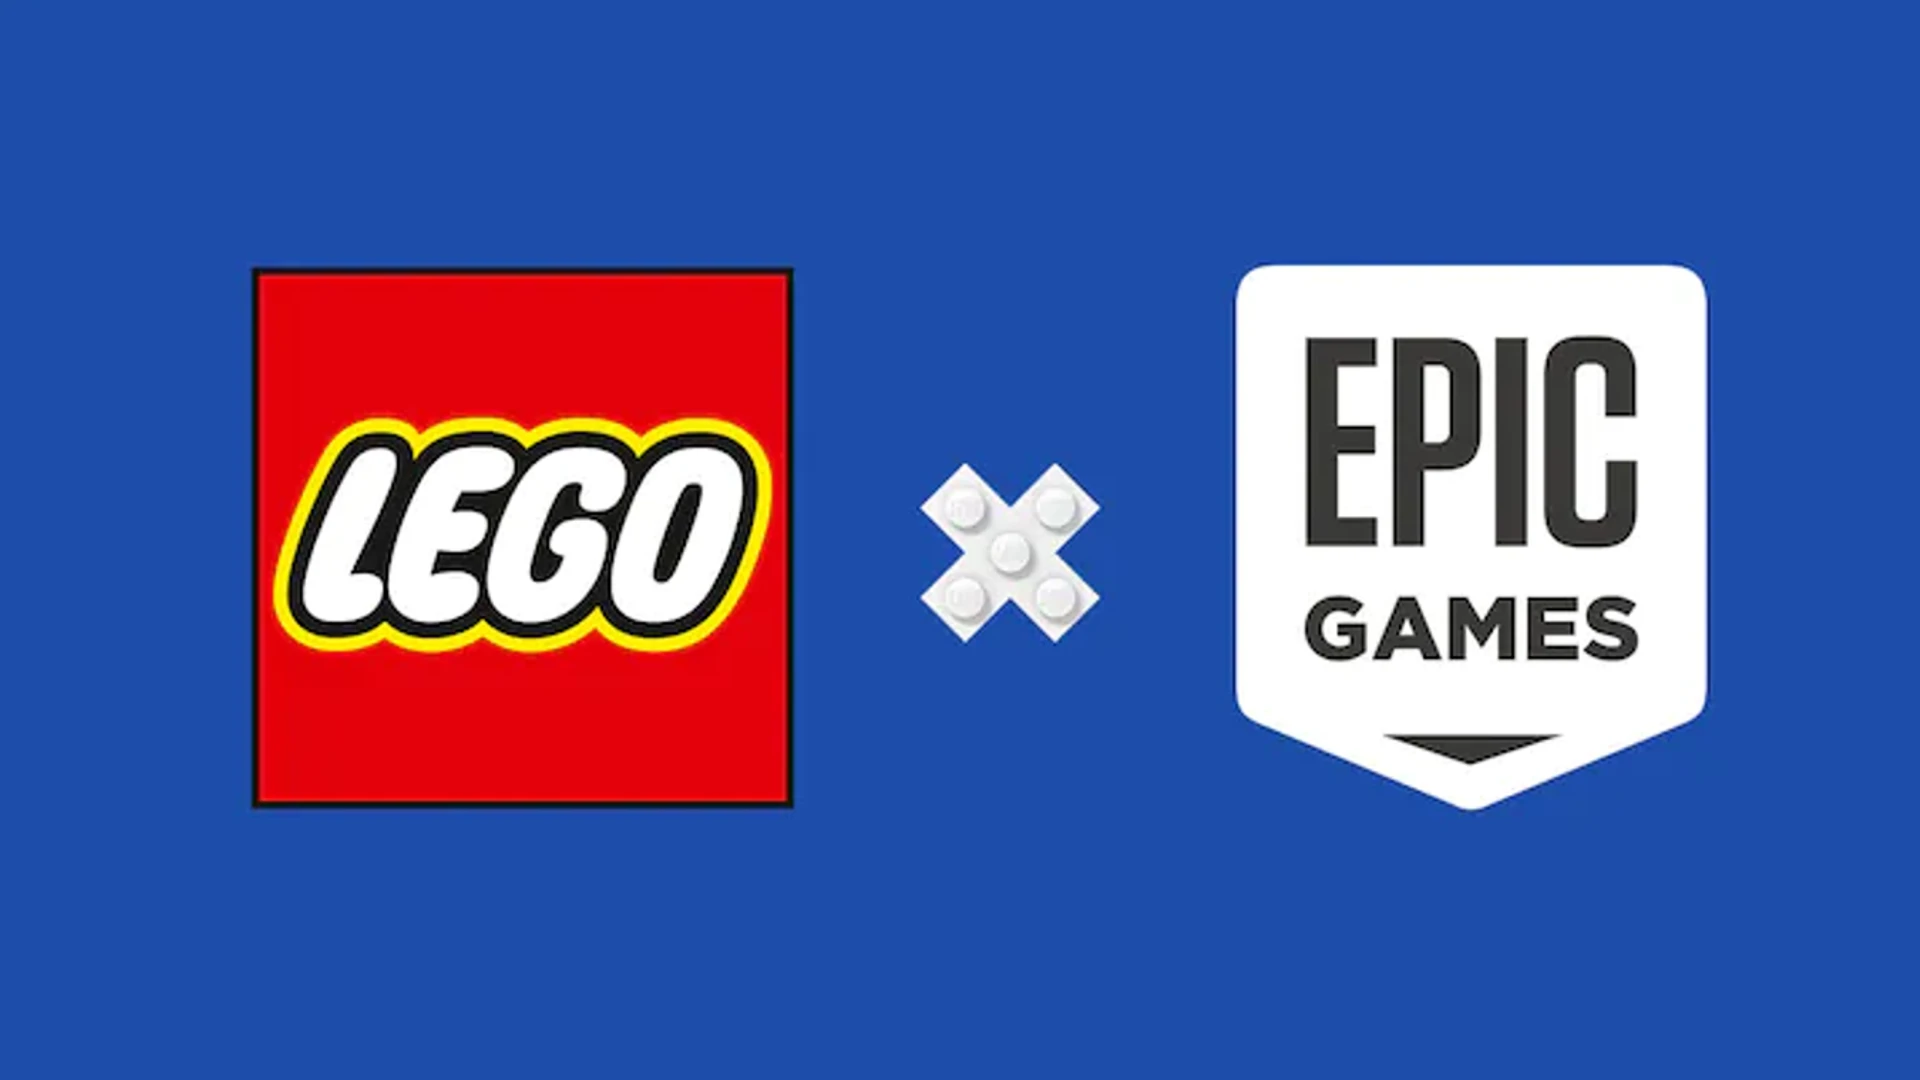 Epic Games and Lego team up to develop a metaverse for children